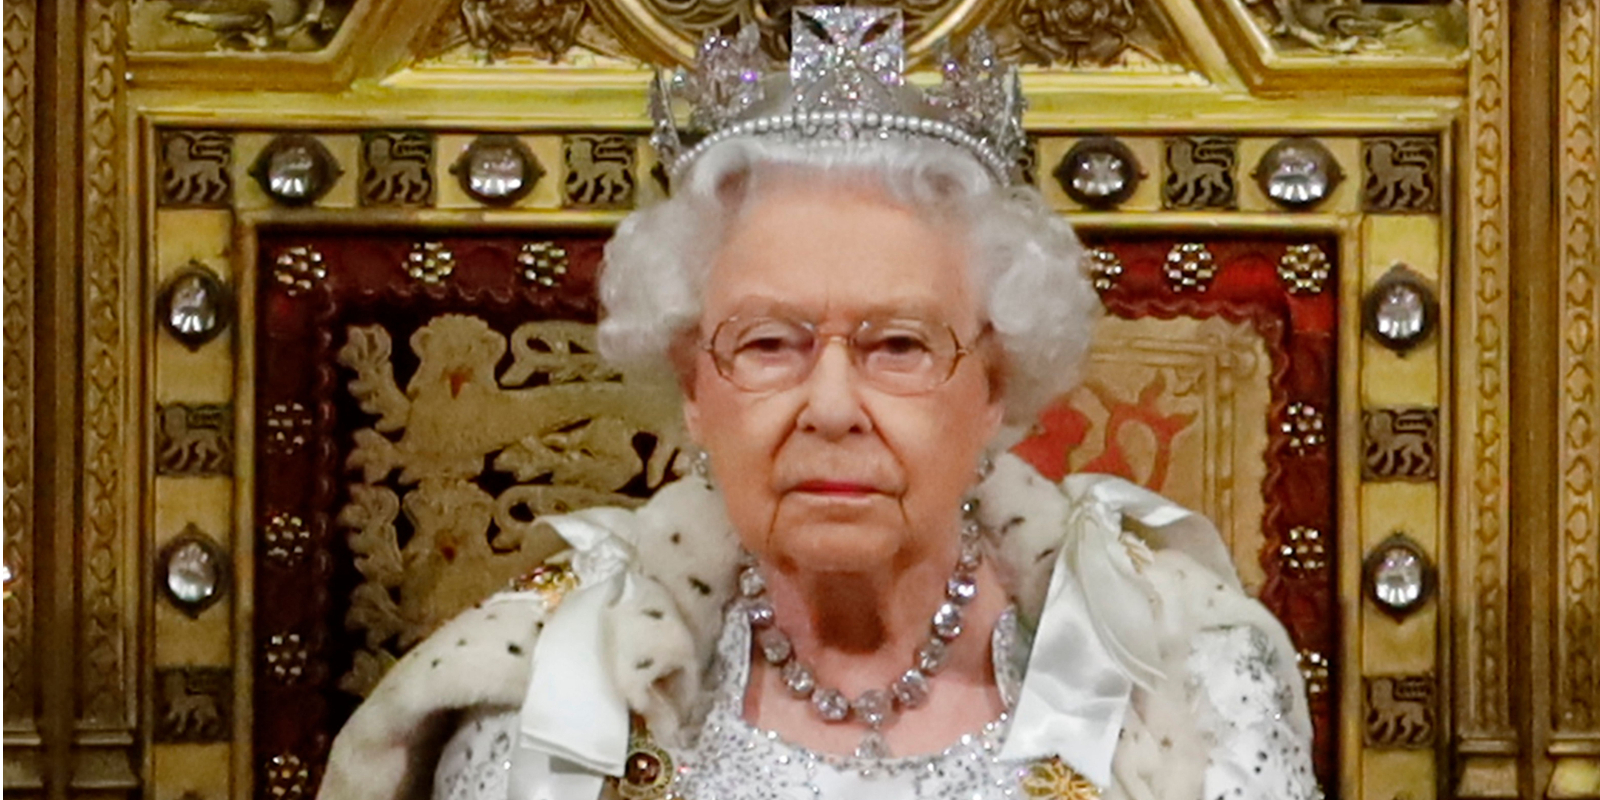 The Loneliness of the Crown Captured in Portrait of Queen Elizabeth For Succession Anniversary